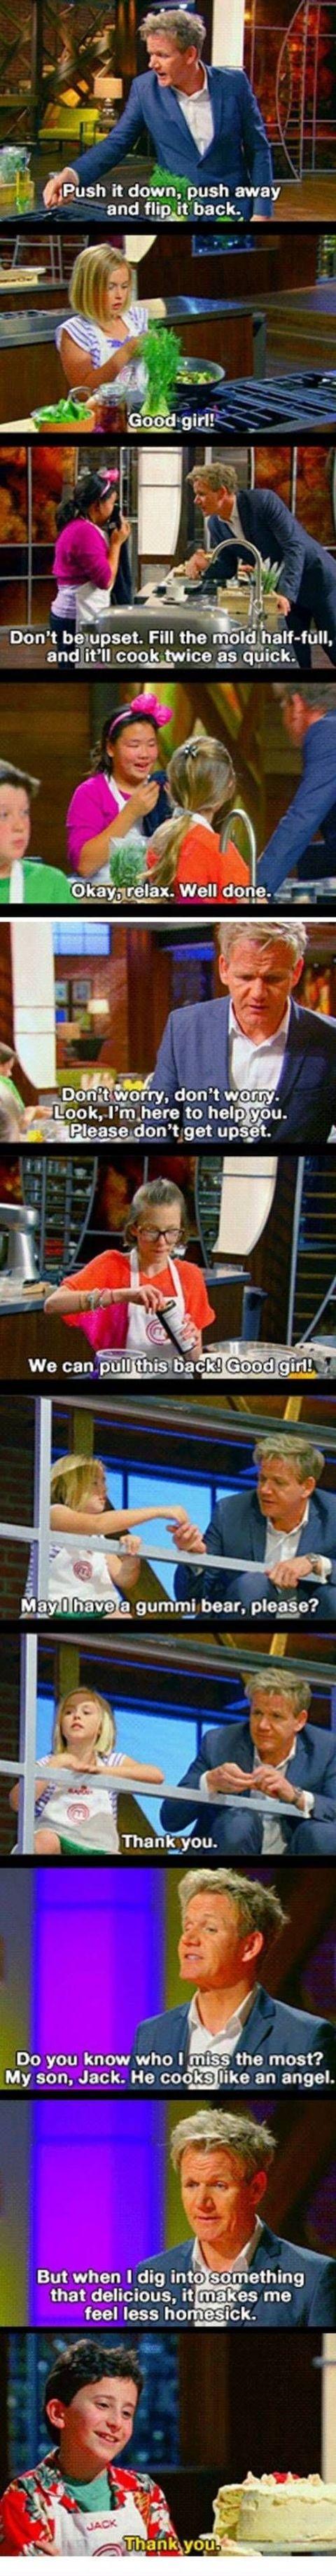 Gordon Ramsay is a different man when it comes to kids.